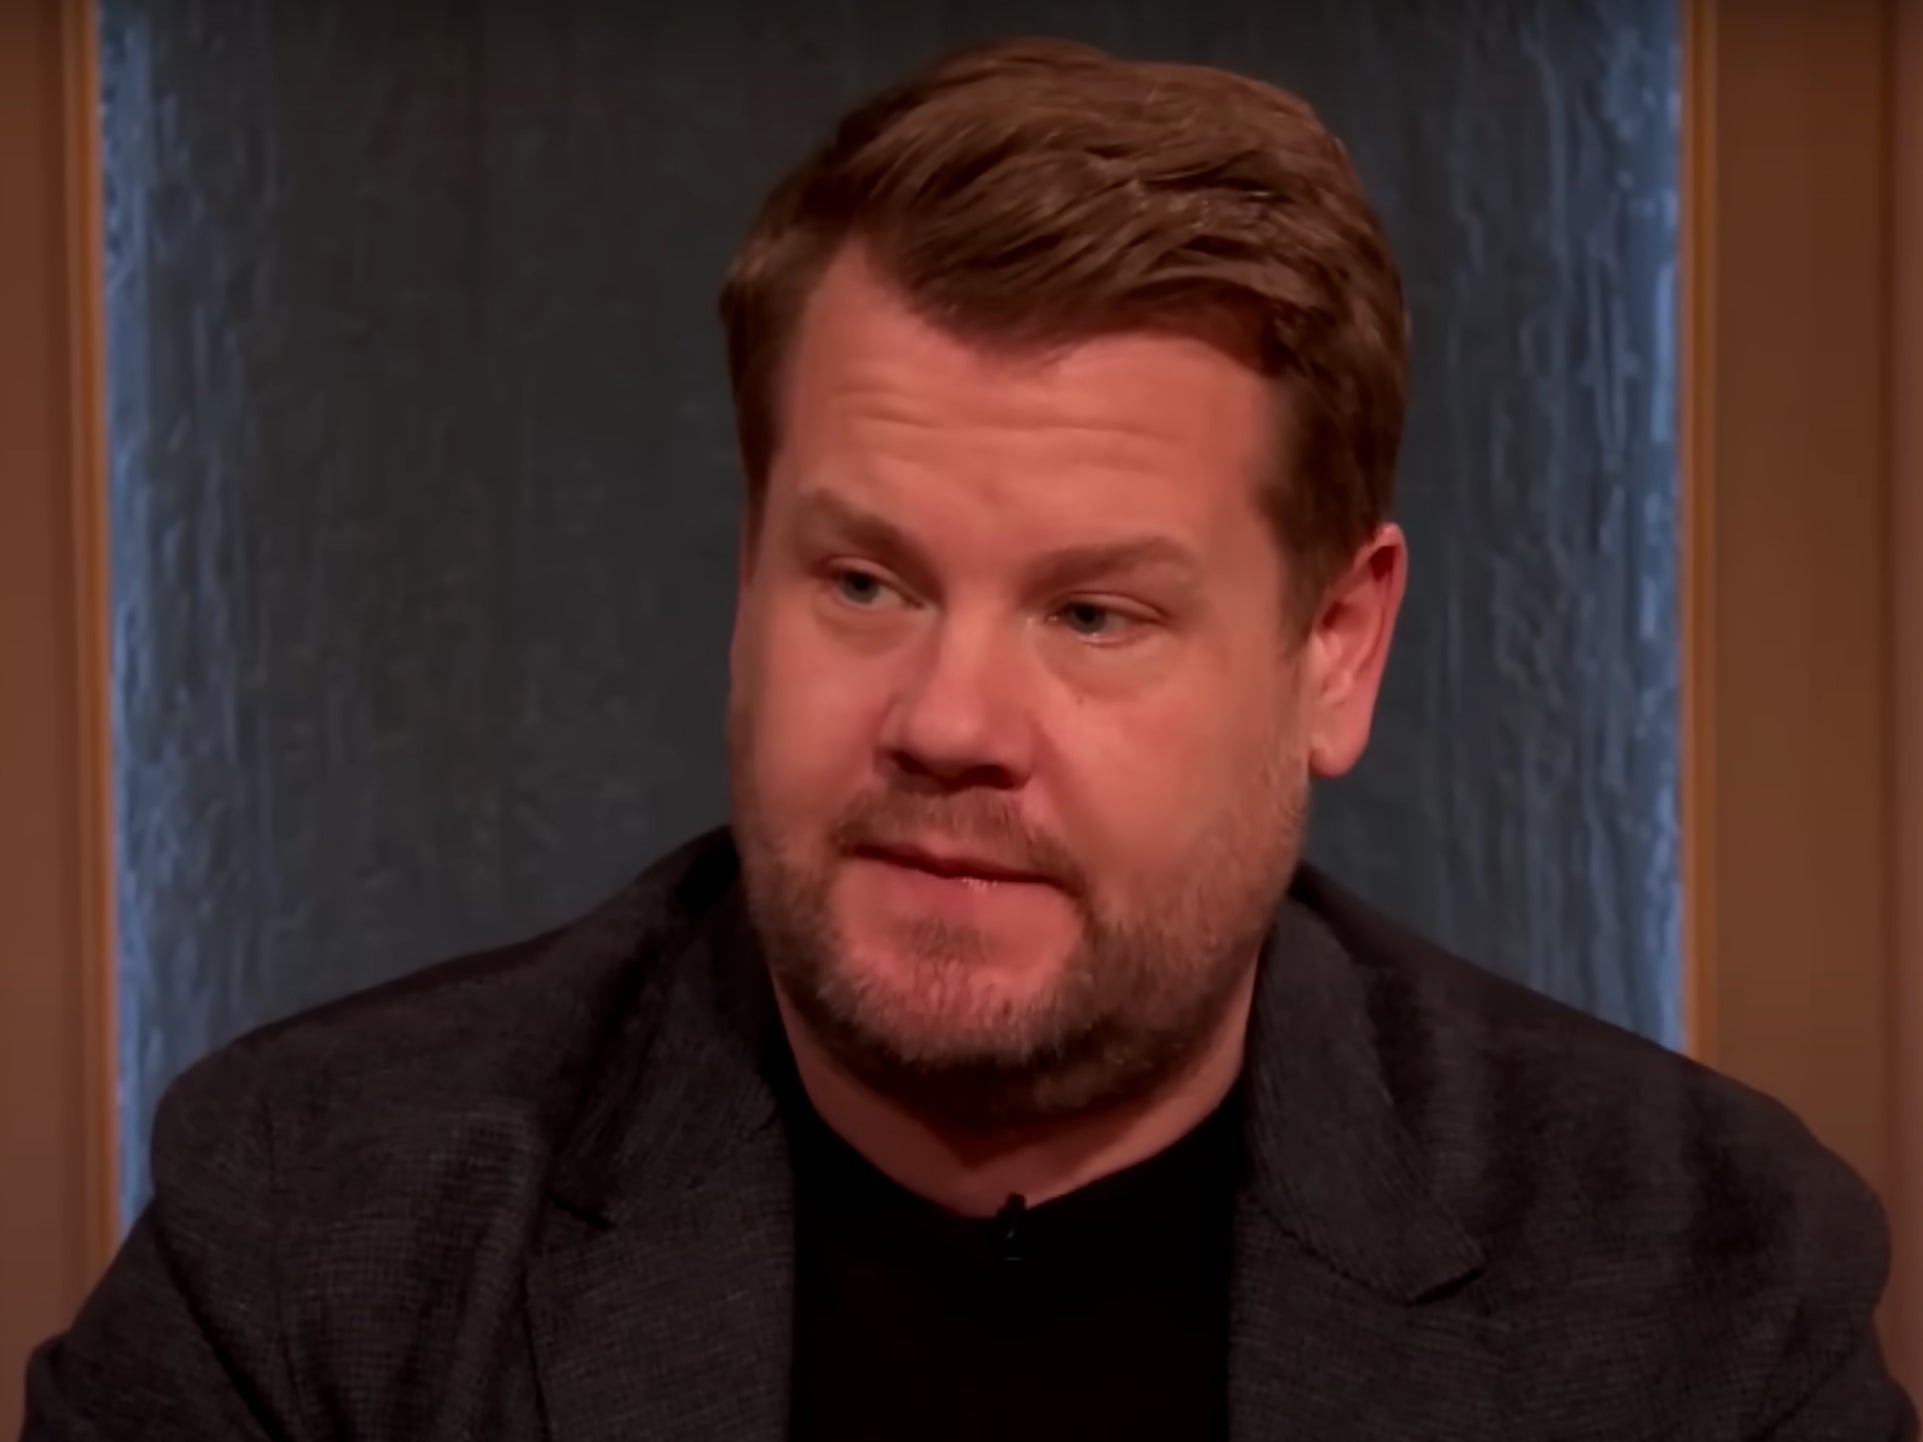 The Late Late Show James Corden tears up as he recalls conversation with son Max, 11, that prompted talk show exit The Independent